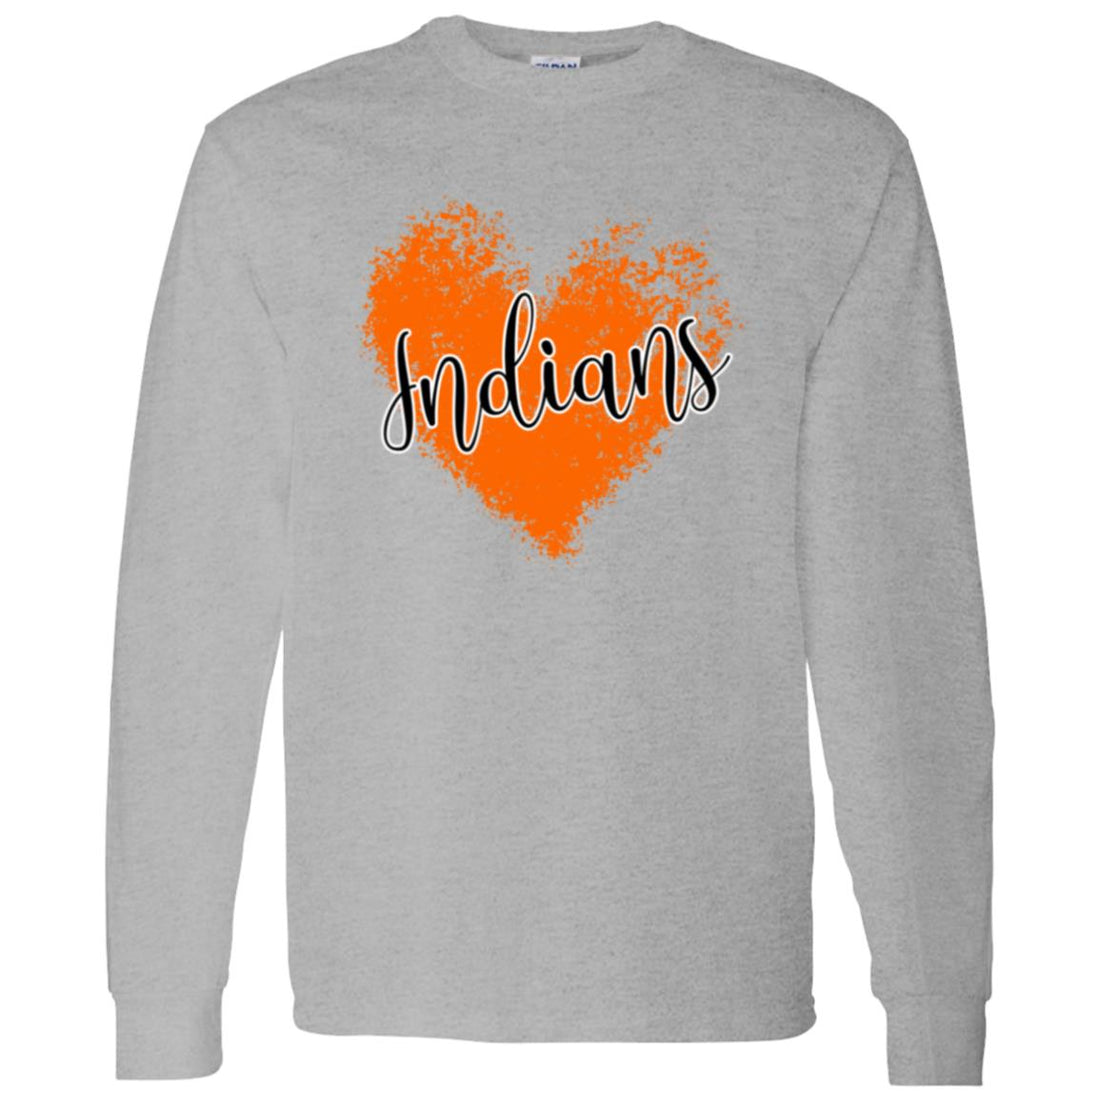 Indian Love LS T-Shirt 5.3 oz. - T-Shirts - Positively Sassy - Indian Love LS T-Shirt 5.3 oz.